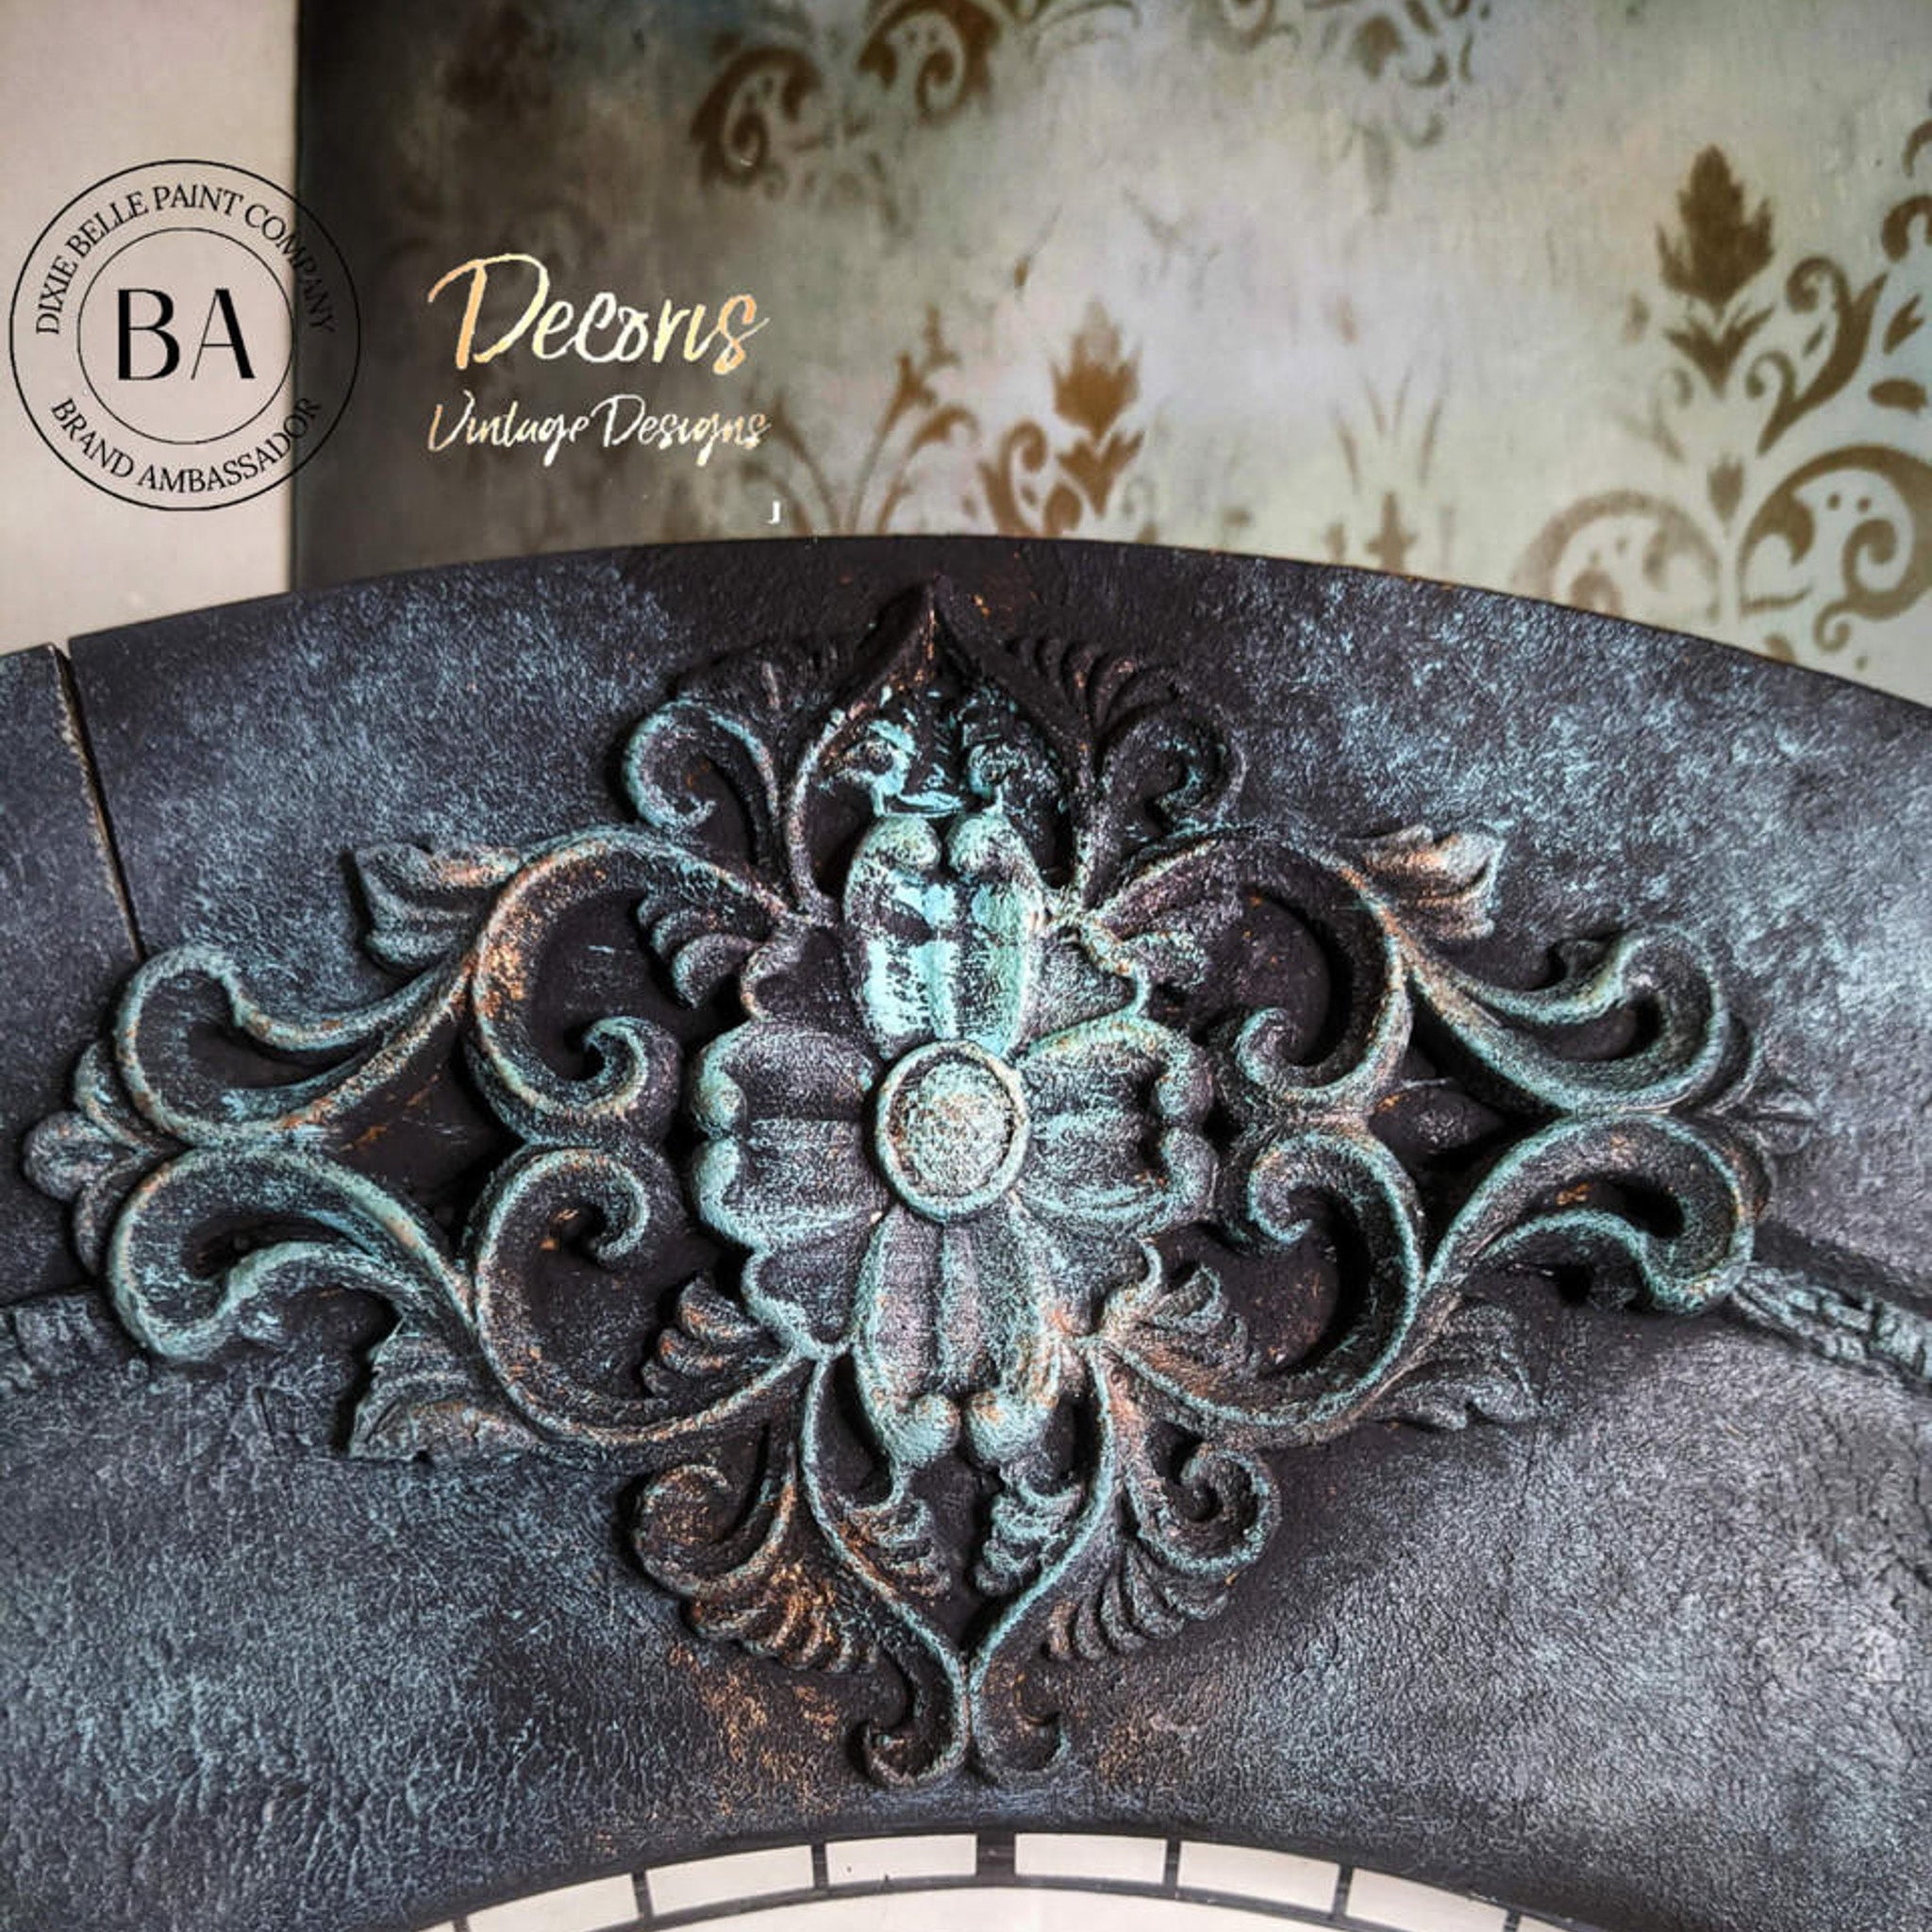 Close-up of a silicone mould casting of a large ornate medallion created by Decoris Vintage Designs is painted with Dixie Belle's Patina Paints over black paint.